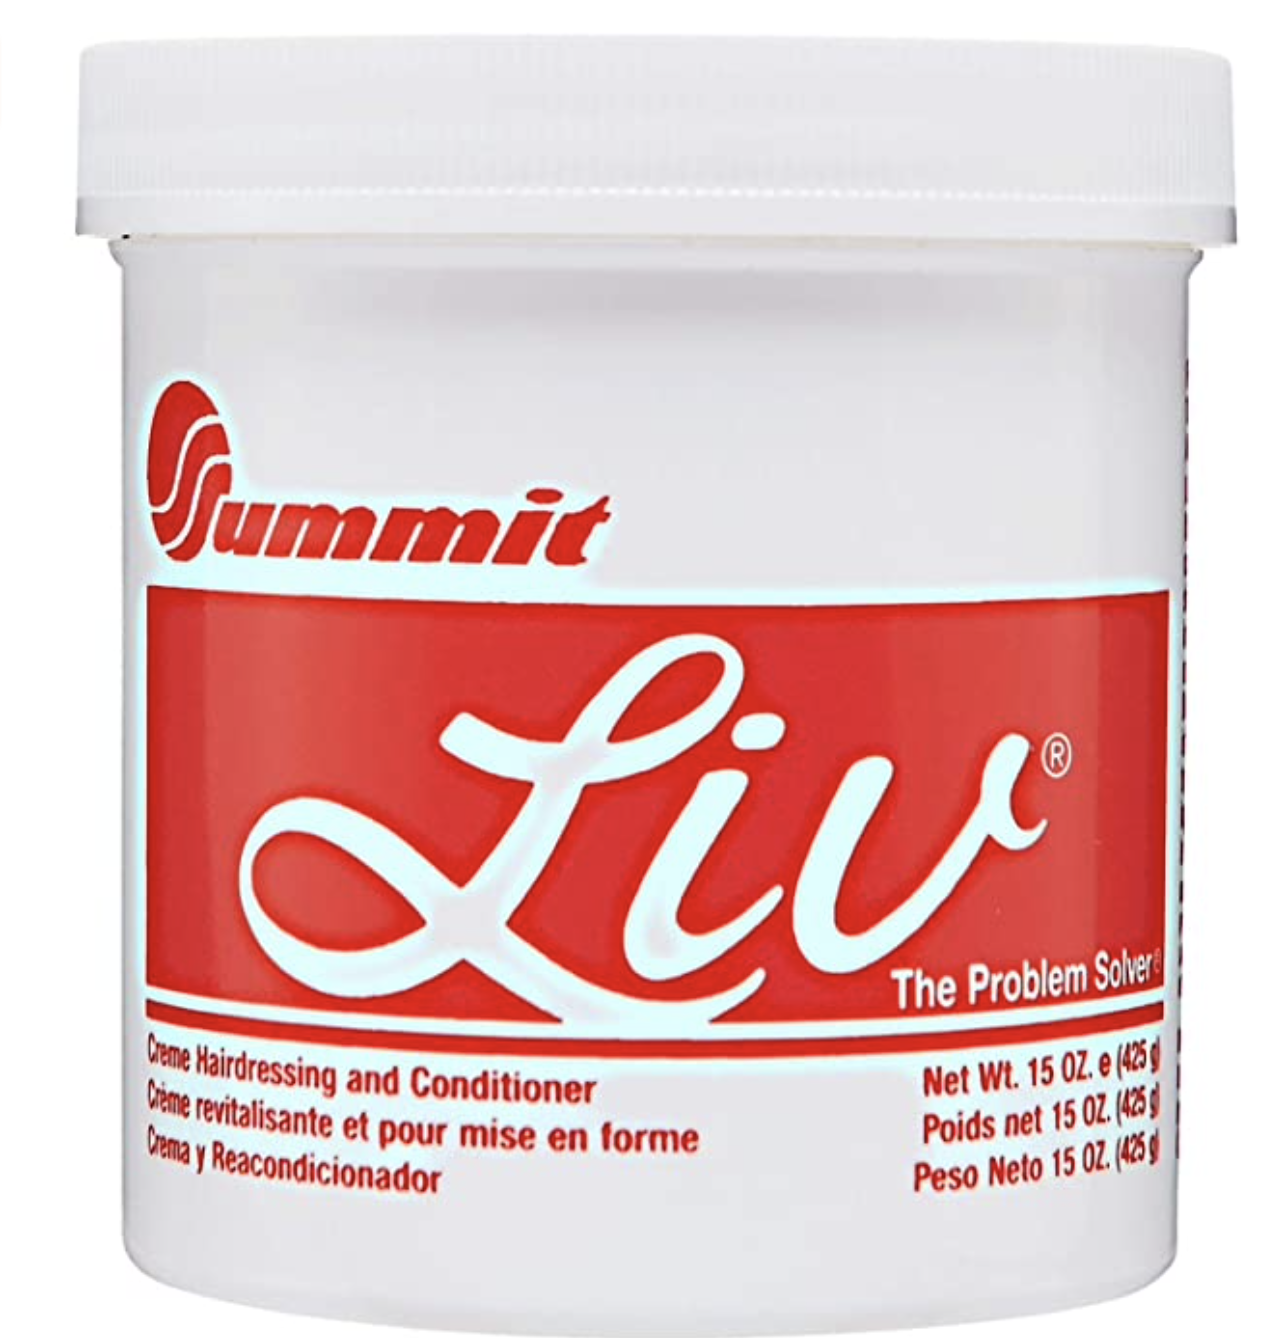 Liv Creme Hairdressing and Conditioner 8 oz - BPolished Beauty Supply